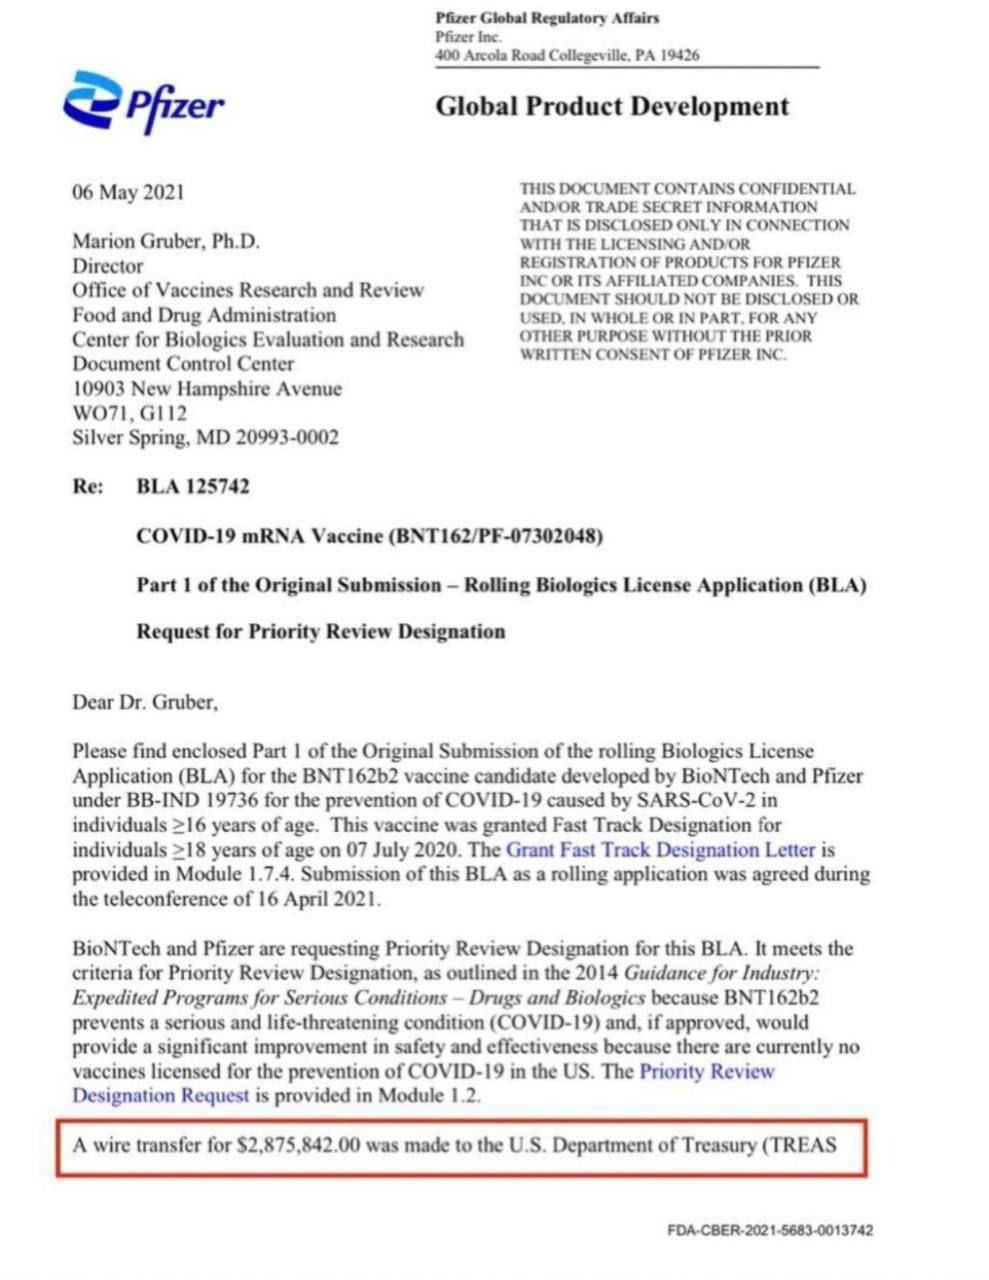 $2.8 million bribe payment from Pfizer to FDA for their Bioweapon “approval.” | image tagged in pfizer,bioweapon,fda,bribery,covid vaccine,mrna | made w/ Imgflip meme maker